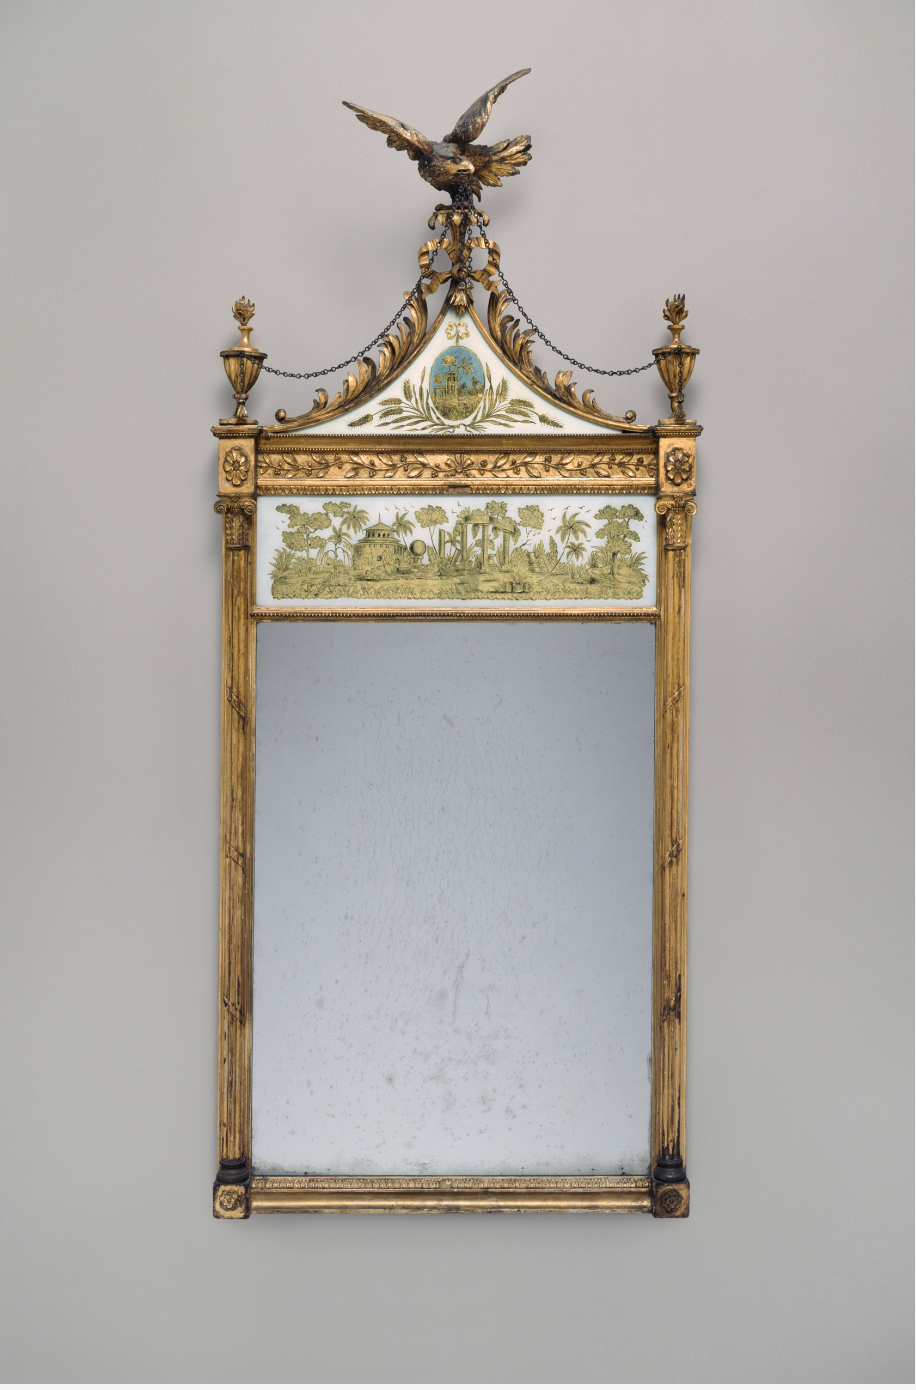 Neoclassical Style Mirror With Verre Eglomise Panel